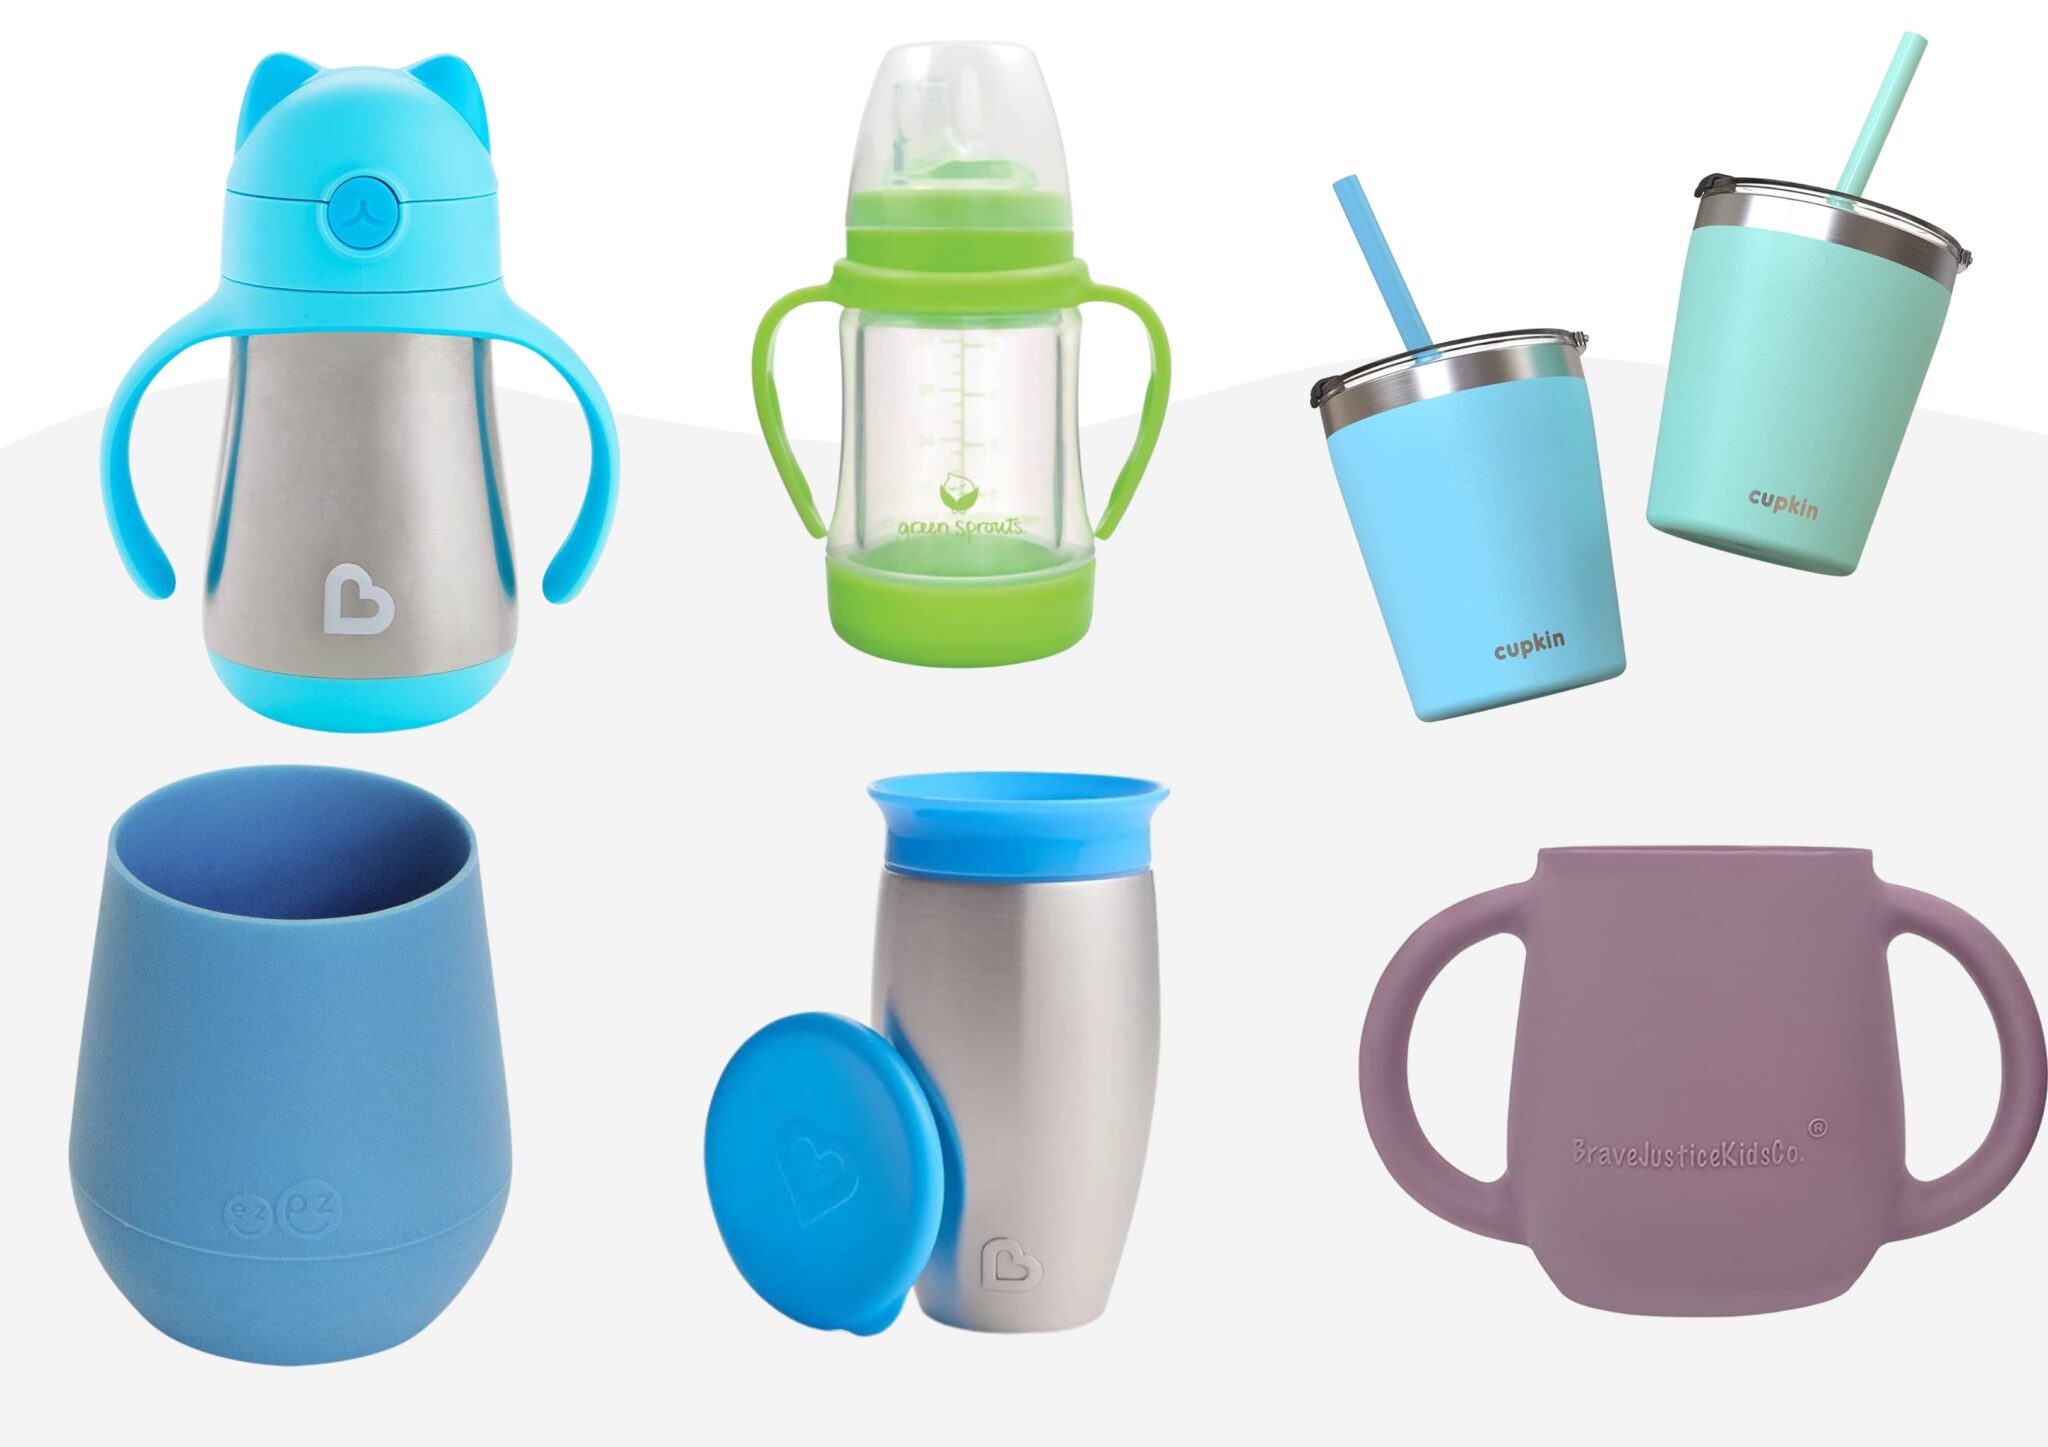 collage image of sippy cup alternatives including straw cups, bottles, and open toddler cups